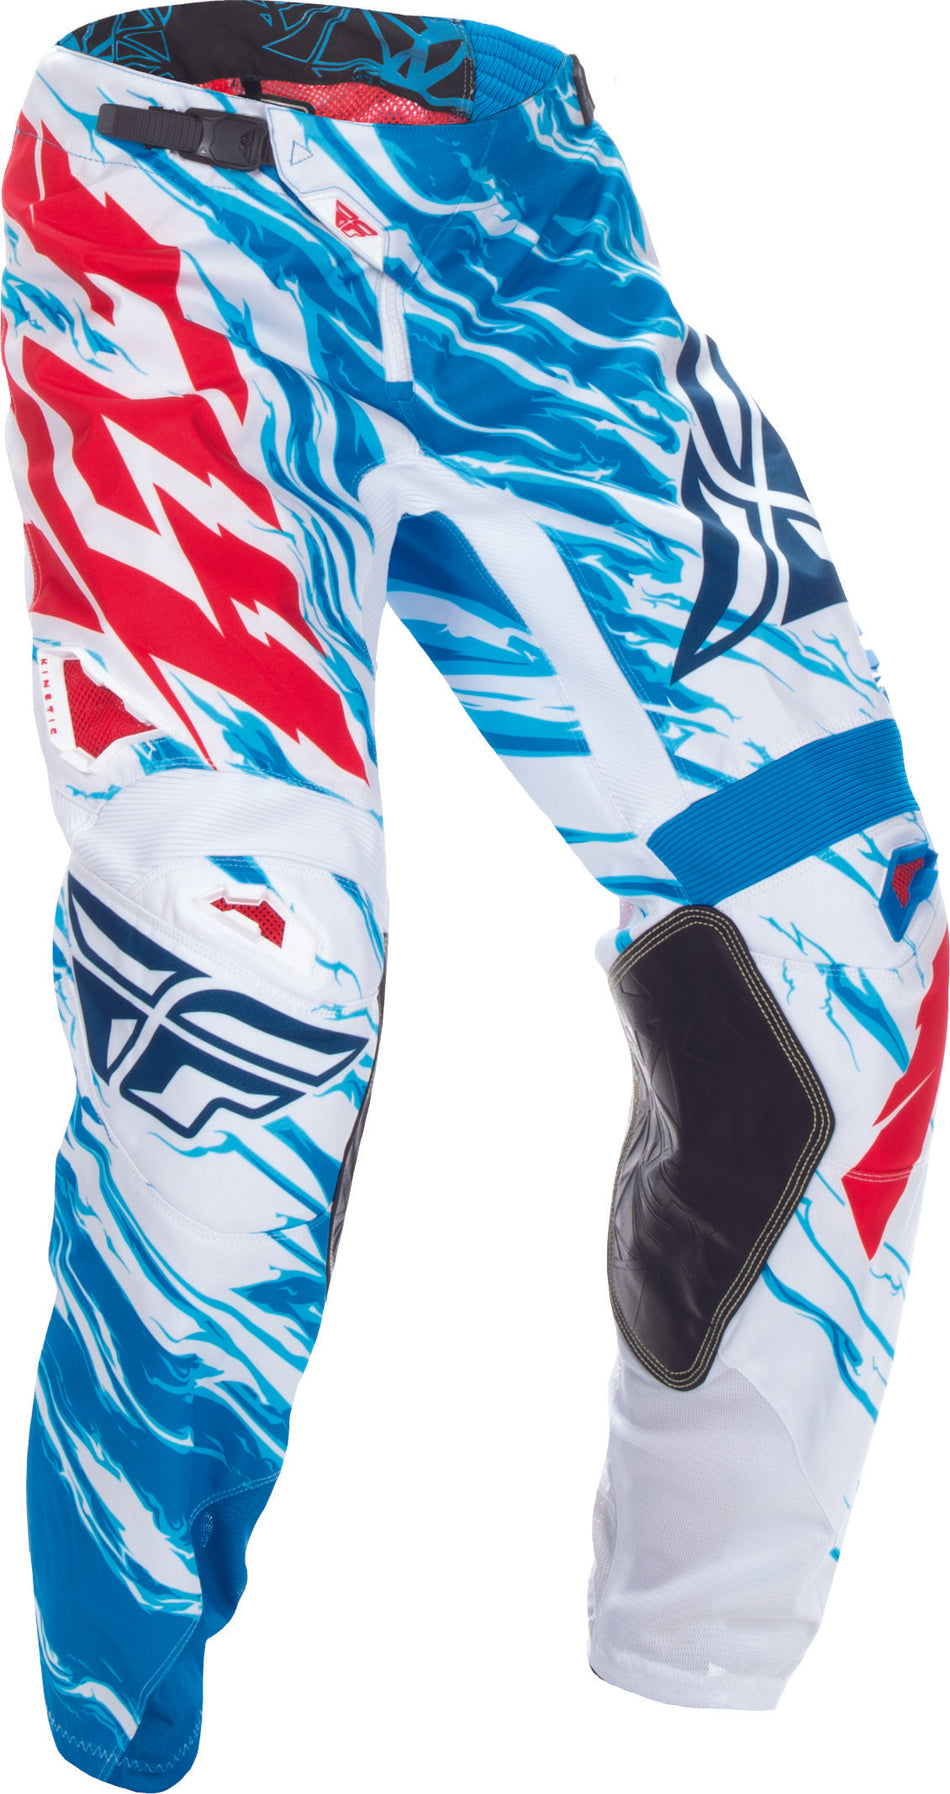 FLY RACING Kinetic Relapse Pant Red/White/Blue Sz 36 370-43236